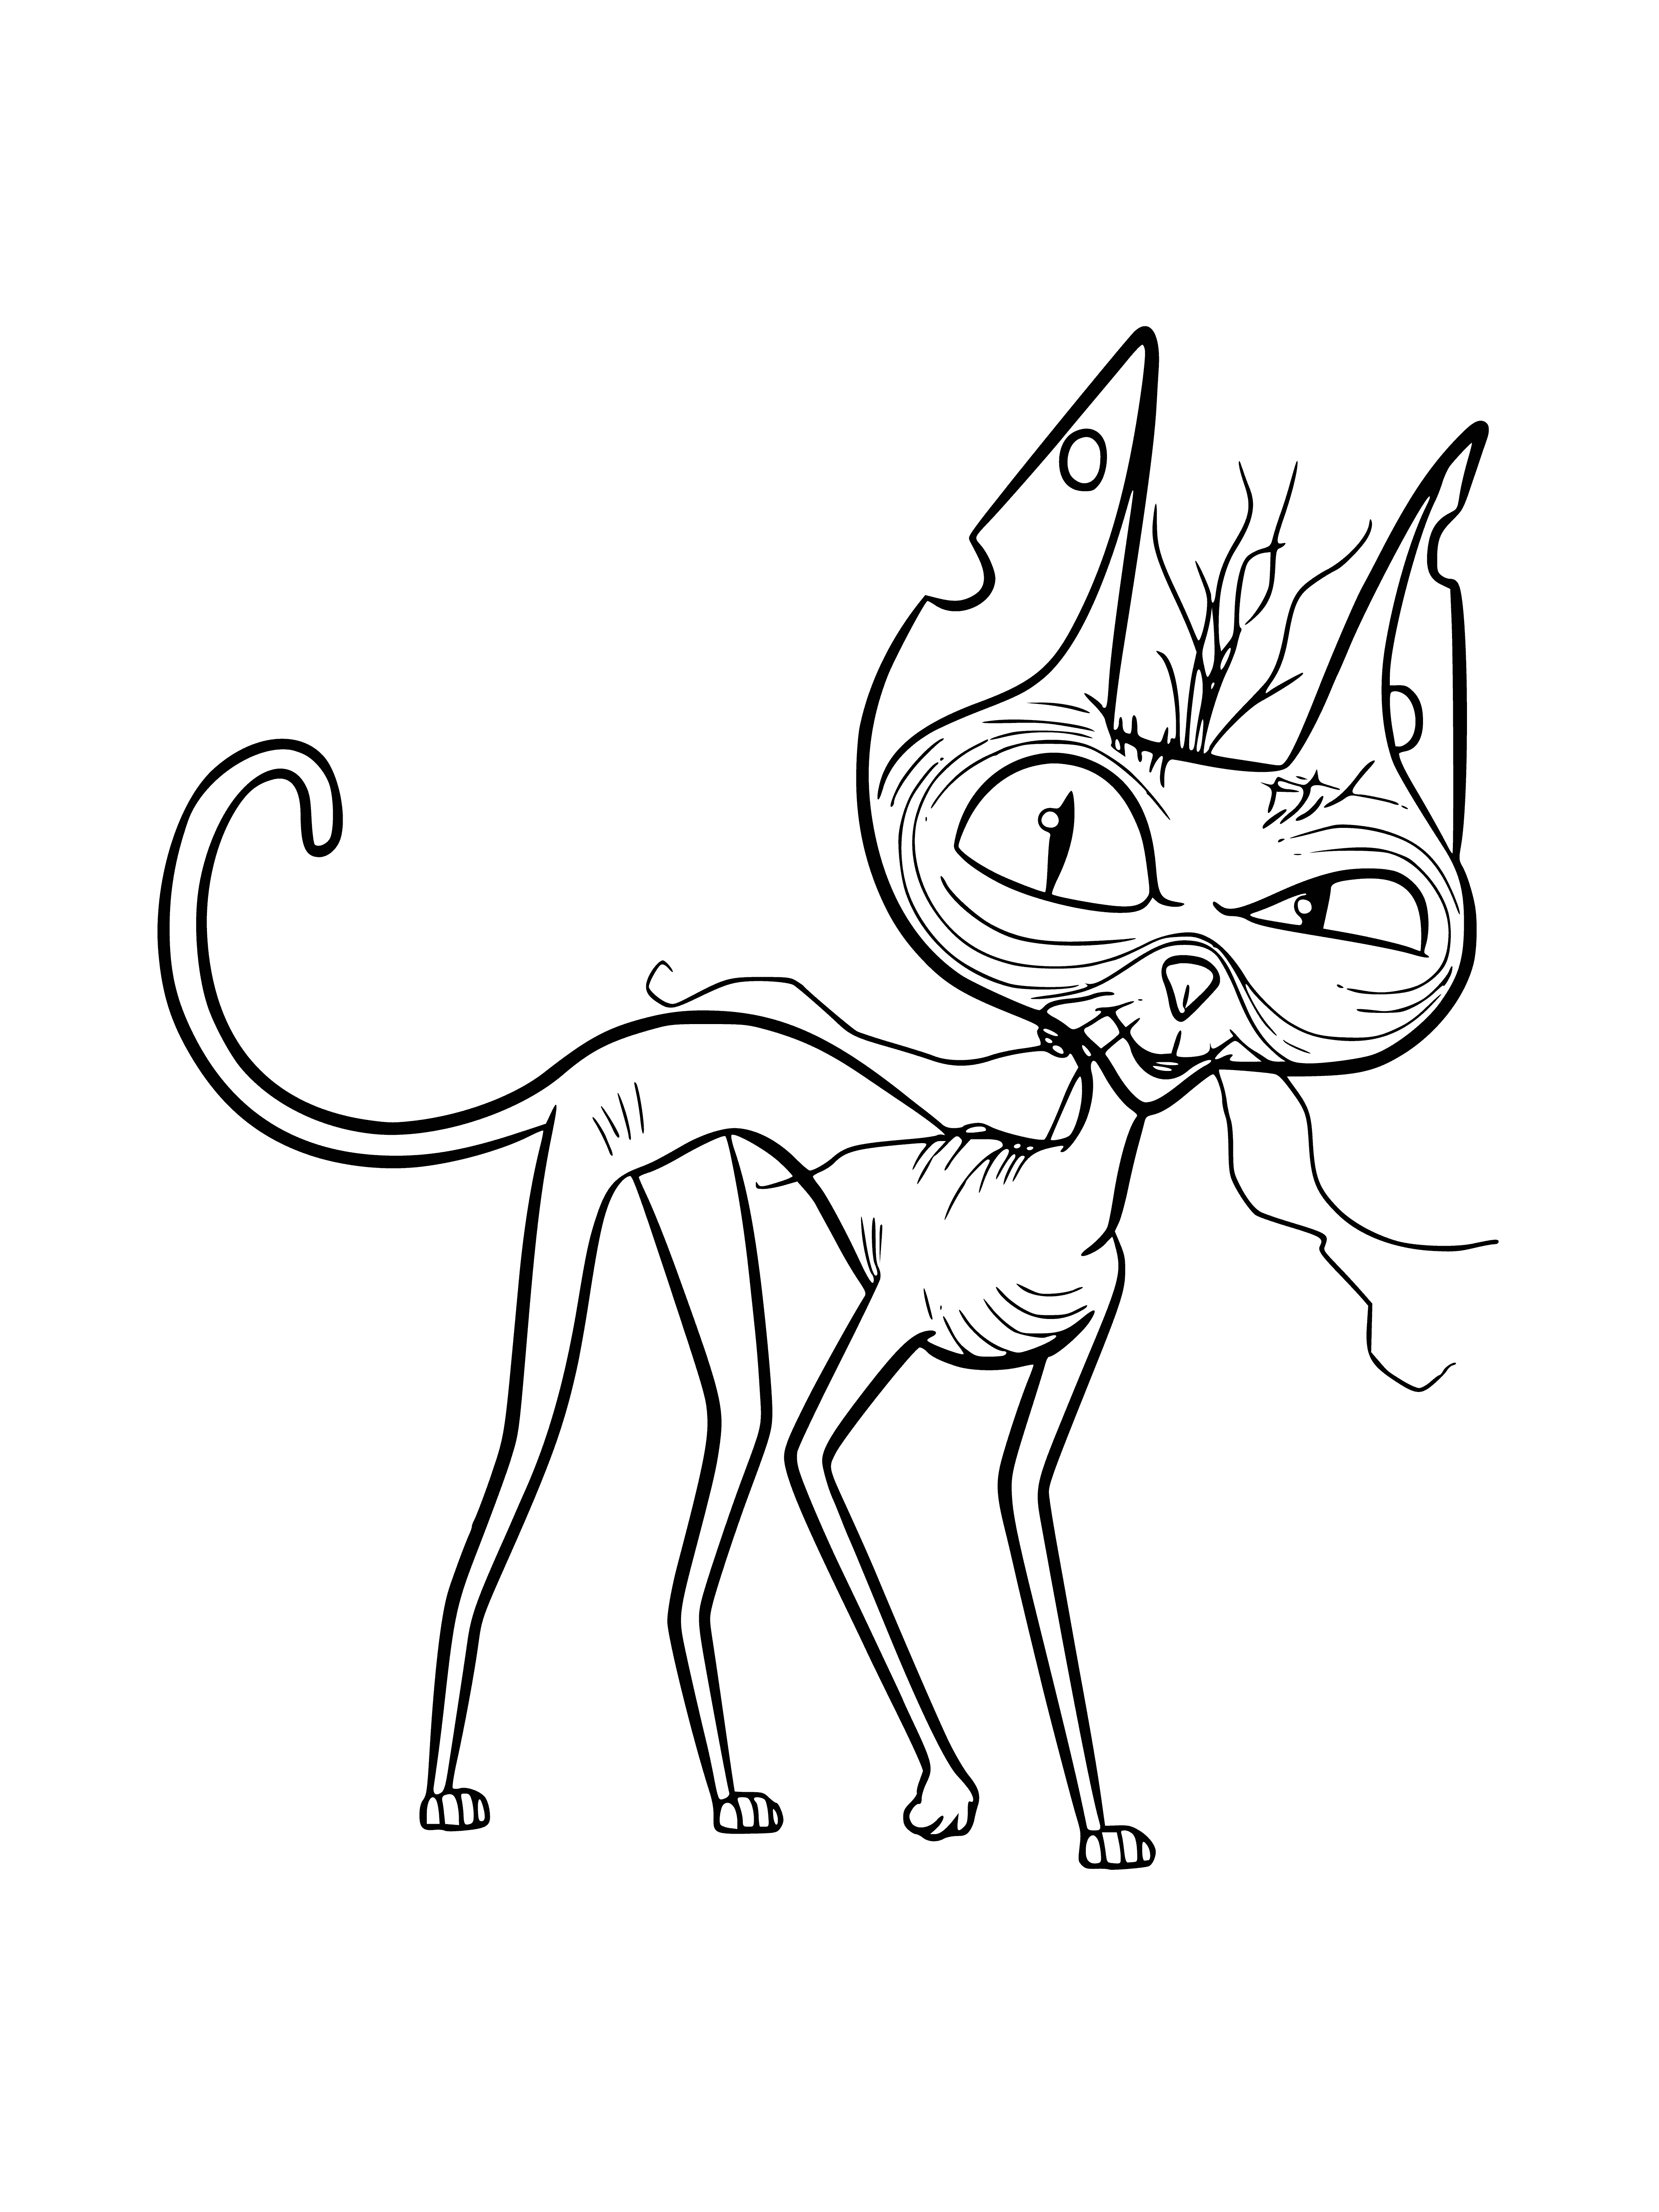 coloring page: Ozone is a curious, playful all-black Sphynx cat with a white "bib". He loves to explore and play with his toys. #catlife